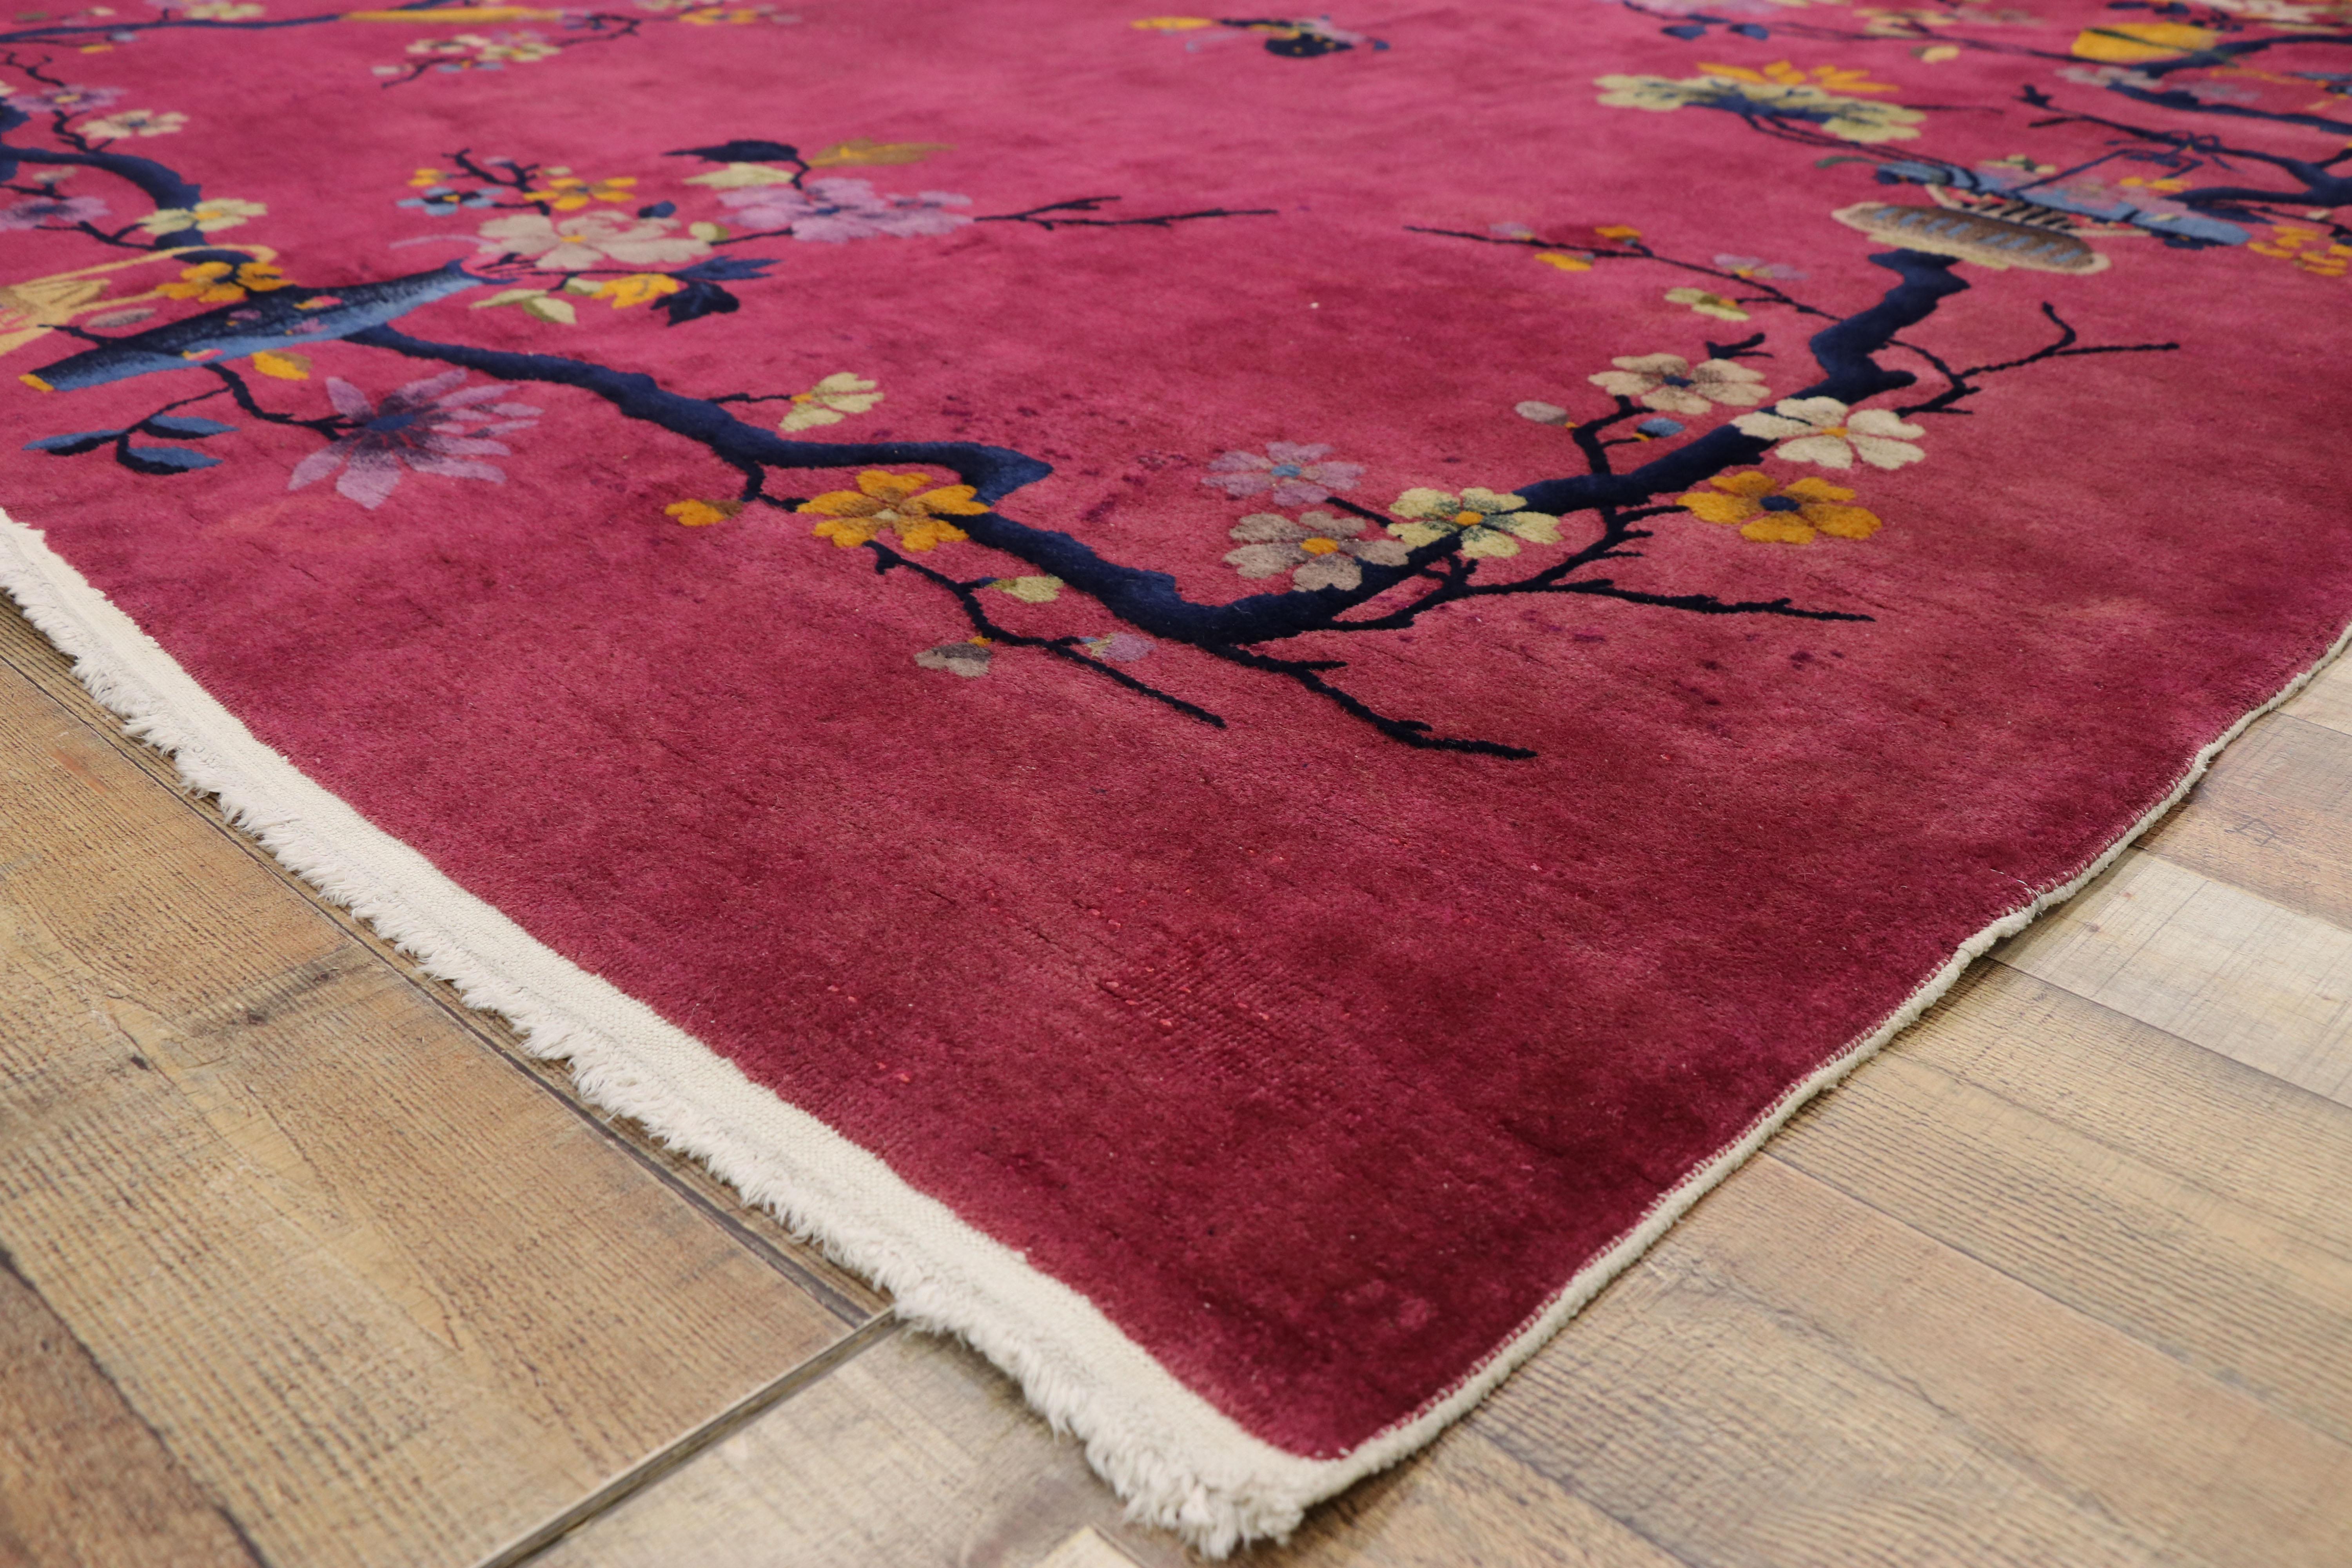 20th Century Magenta Pink Antique Chinese Art Deco Rug with Pictorial Chinoiserie Design